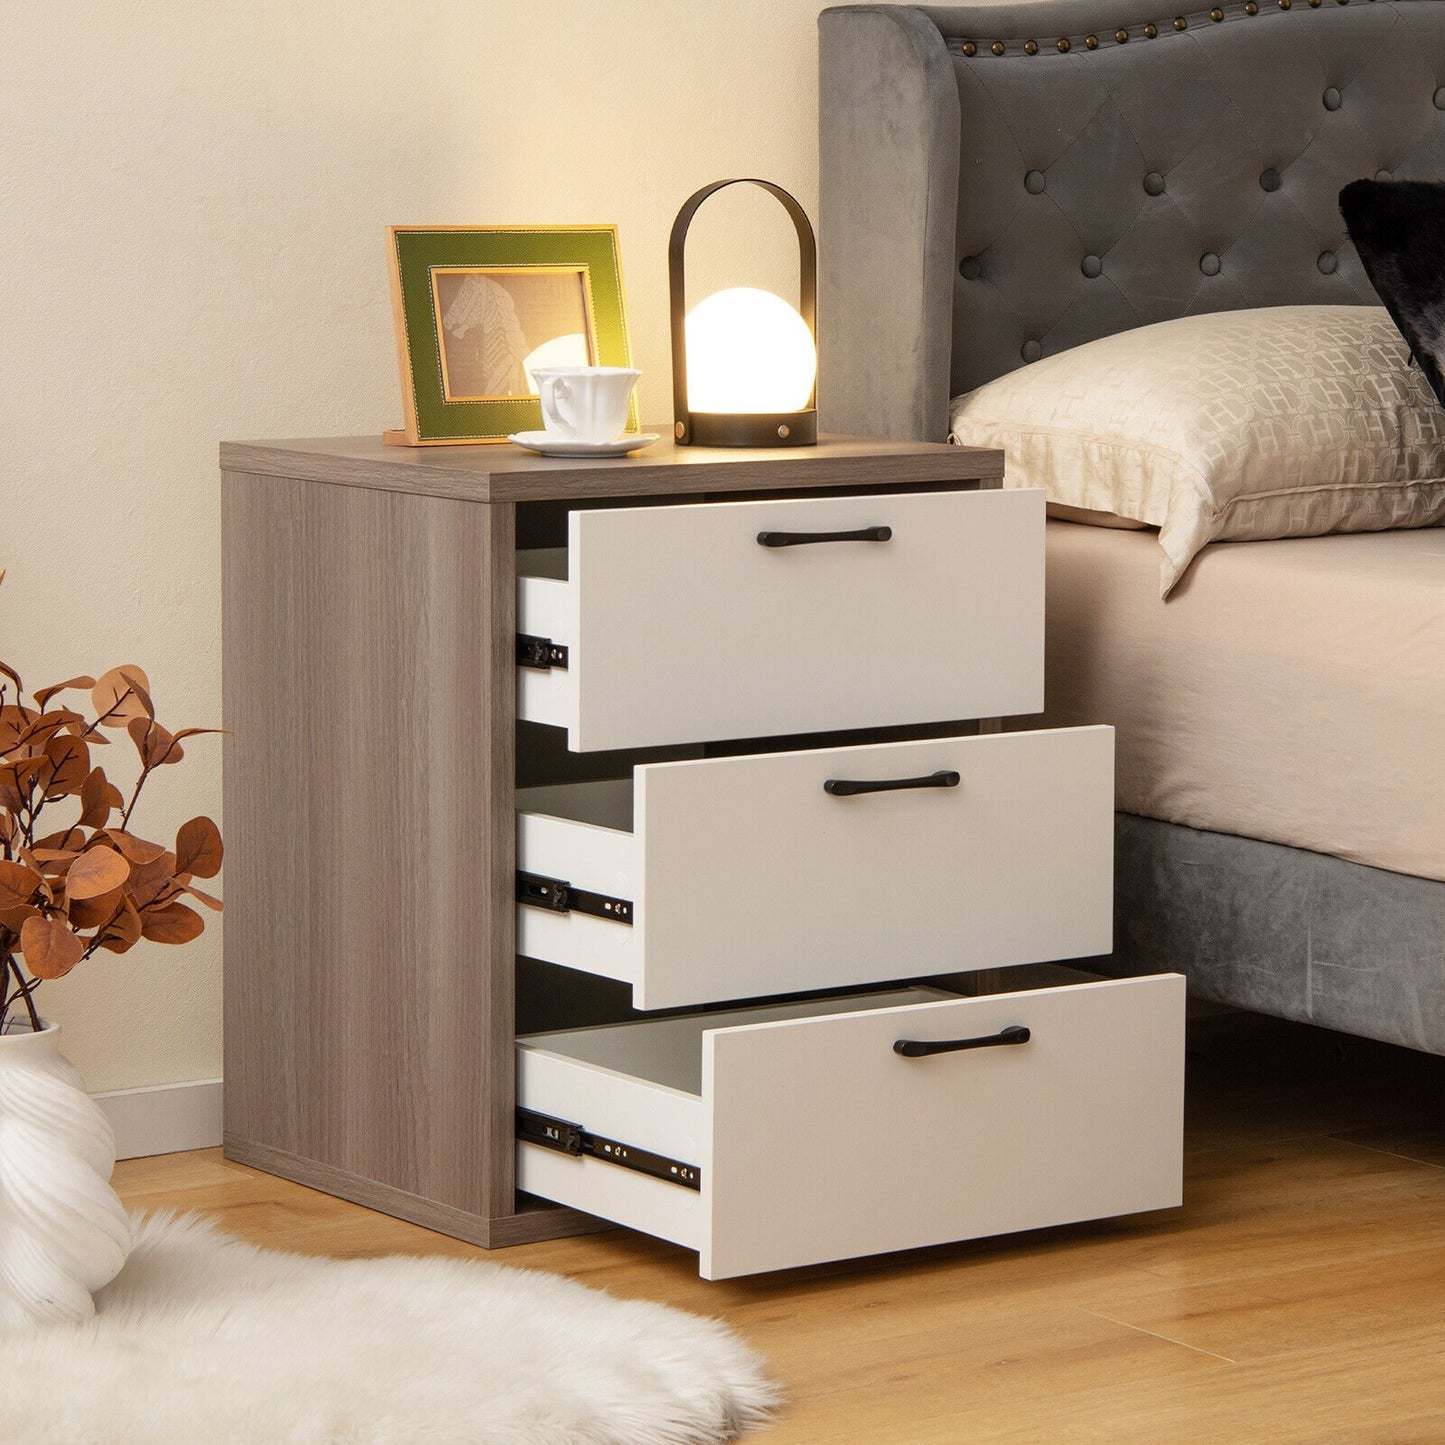 3 Slide-out Drawers Modern Dresser with Wide Storage Space, Gray & White